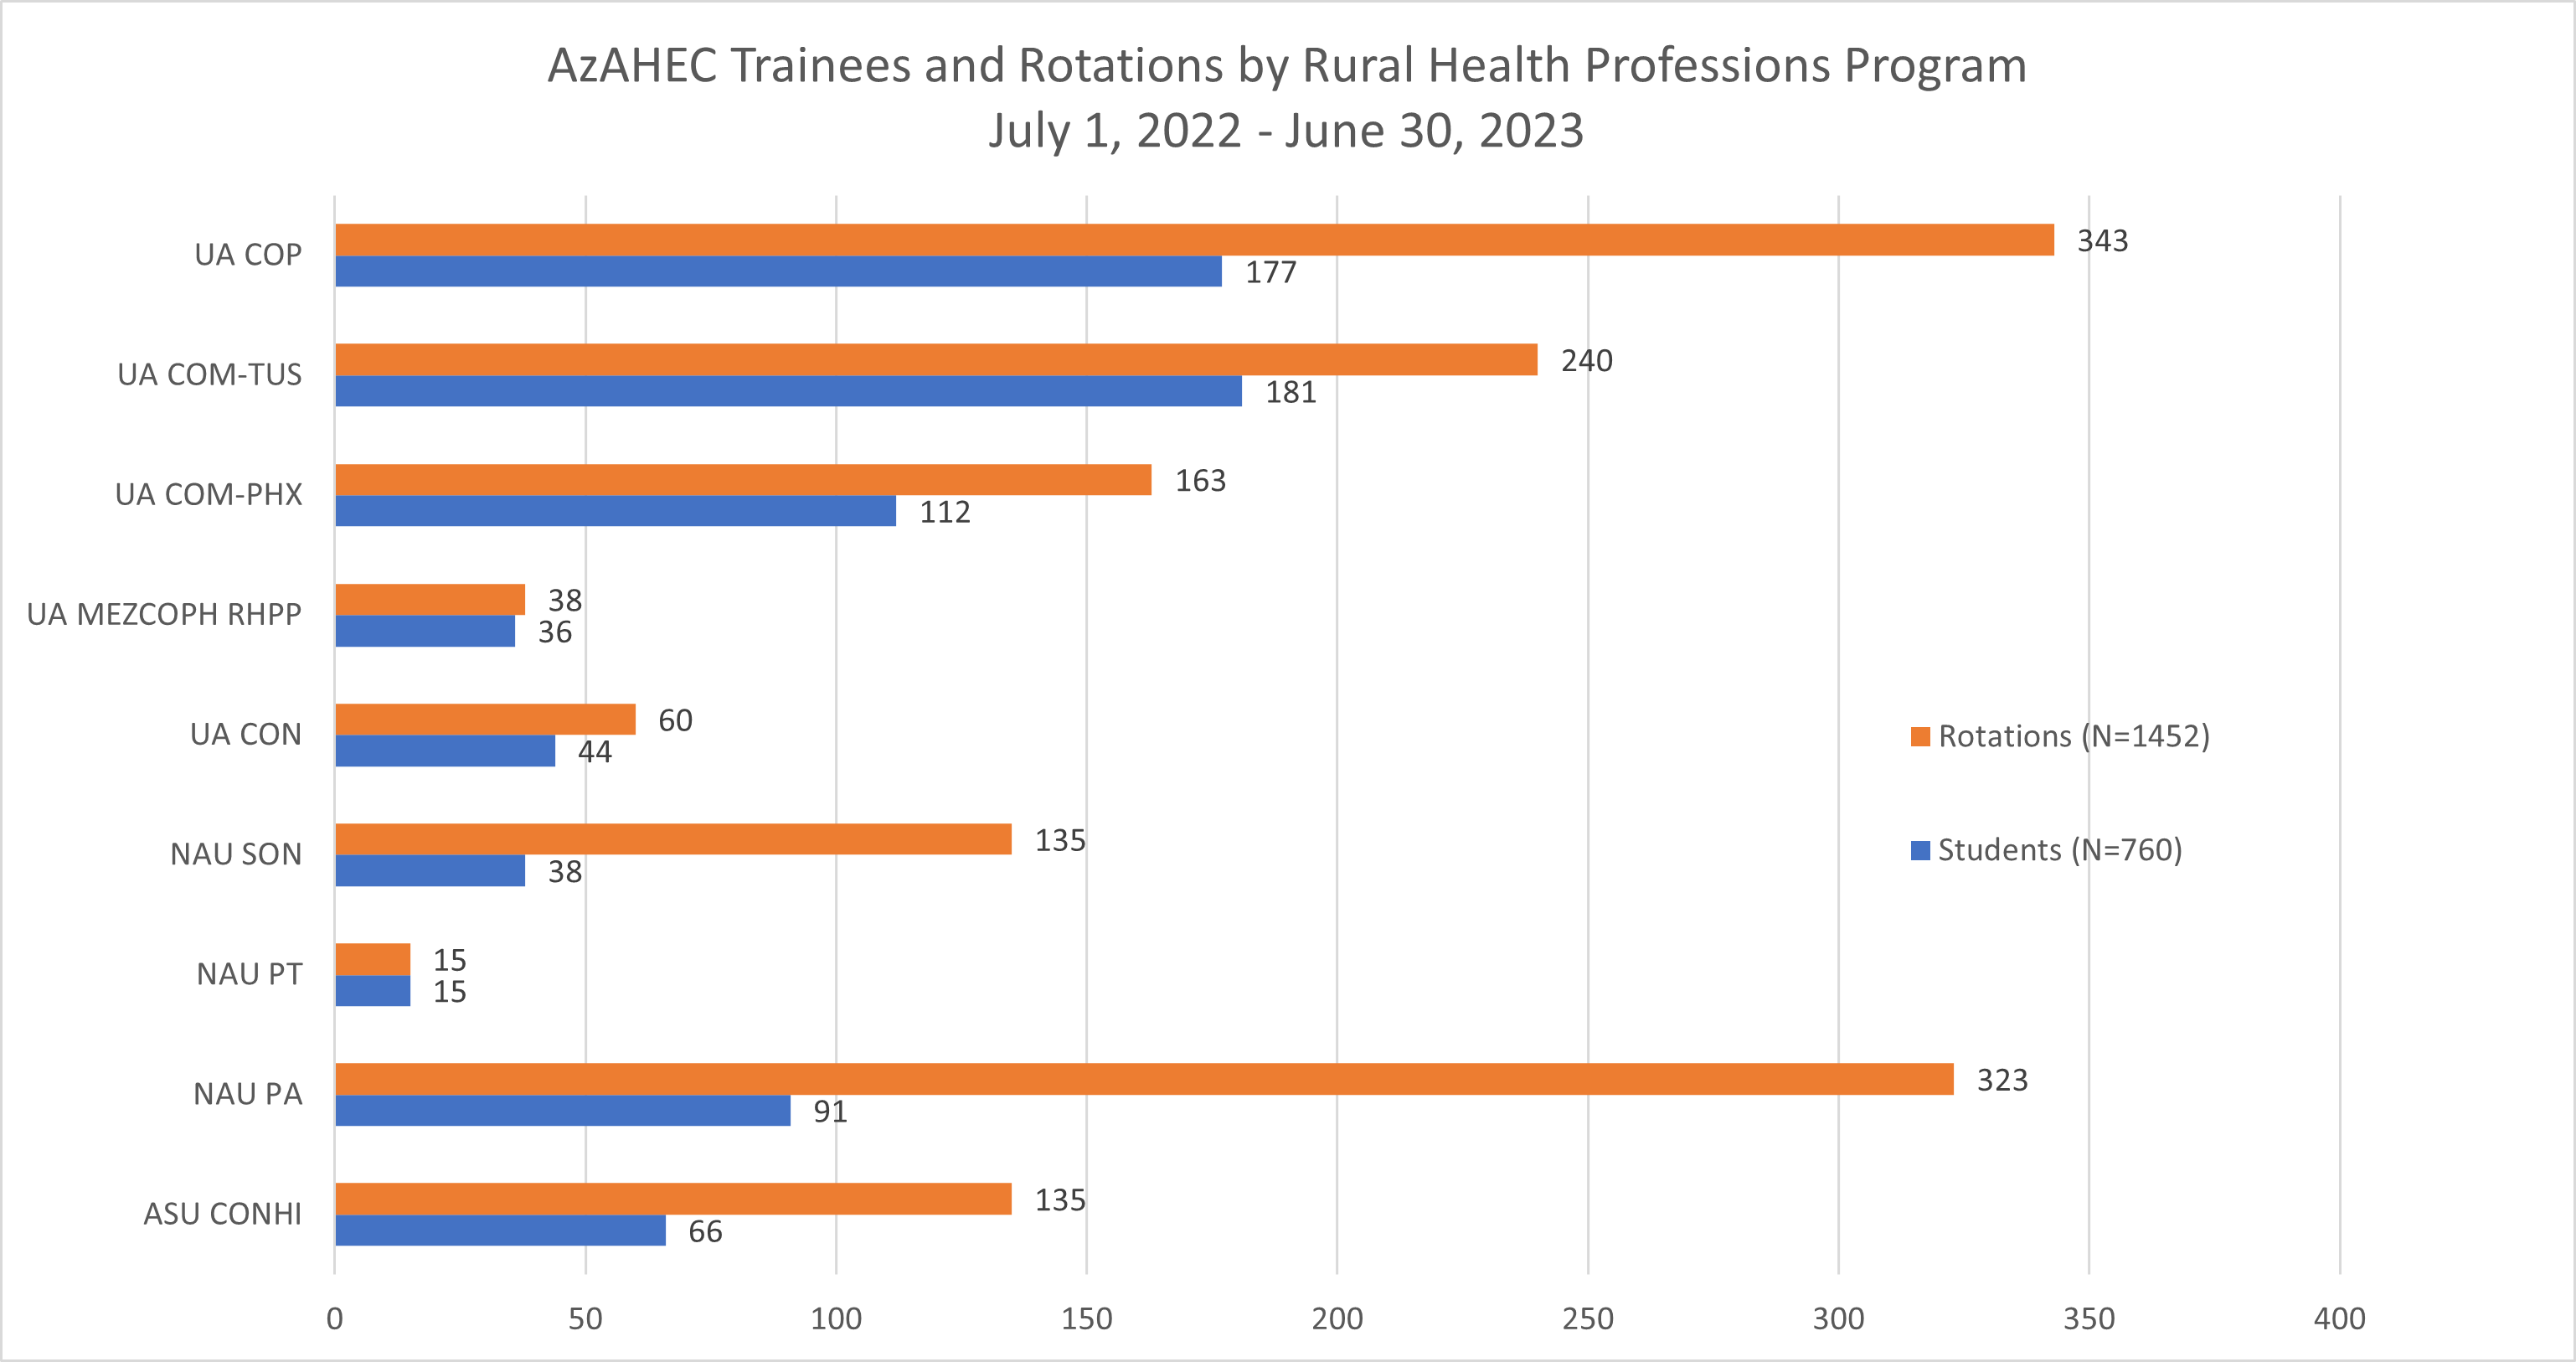 Graph of rural health participants, their disciplines, and Arizona universities.